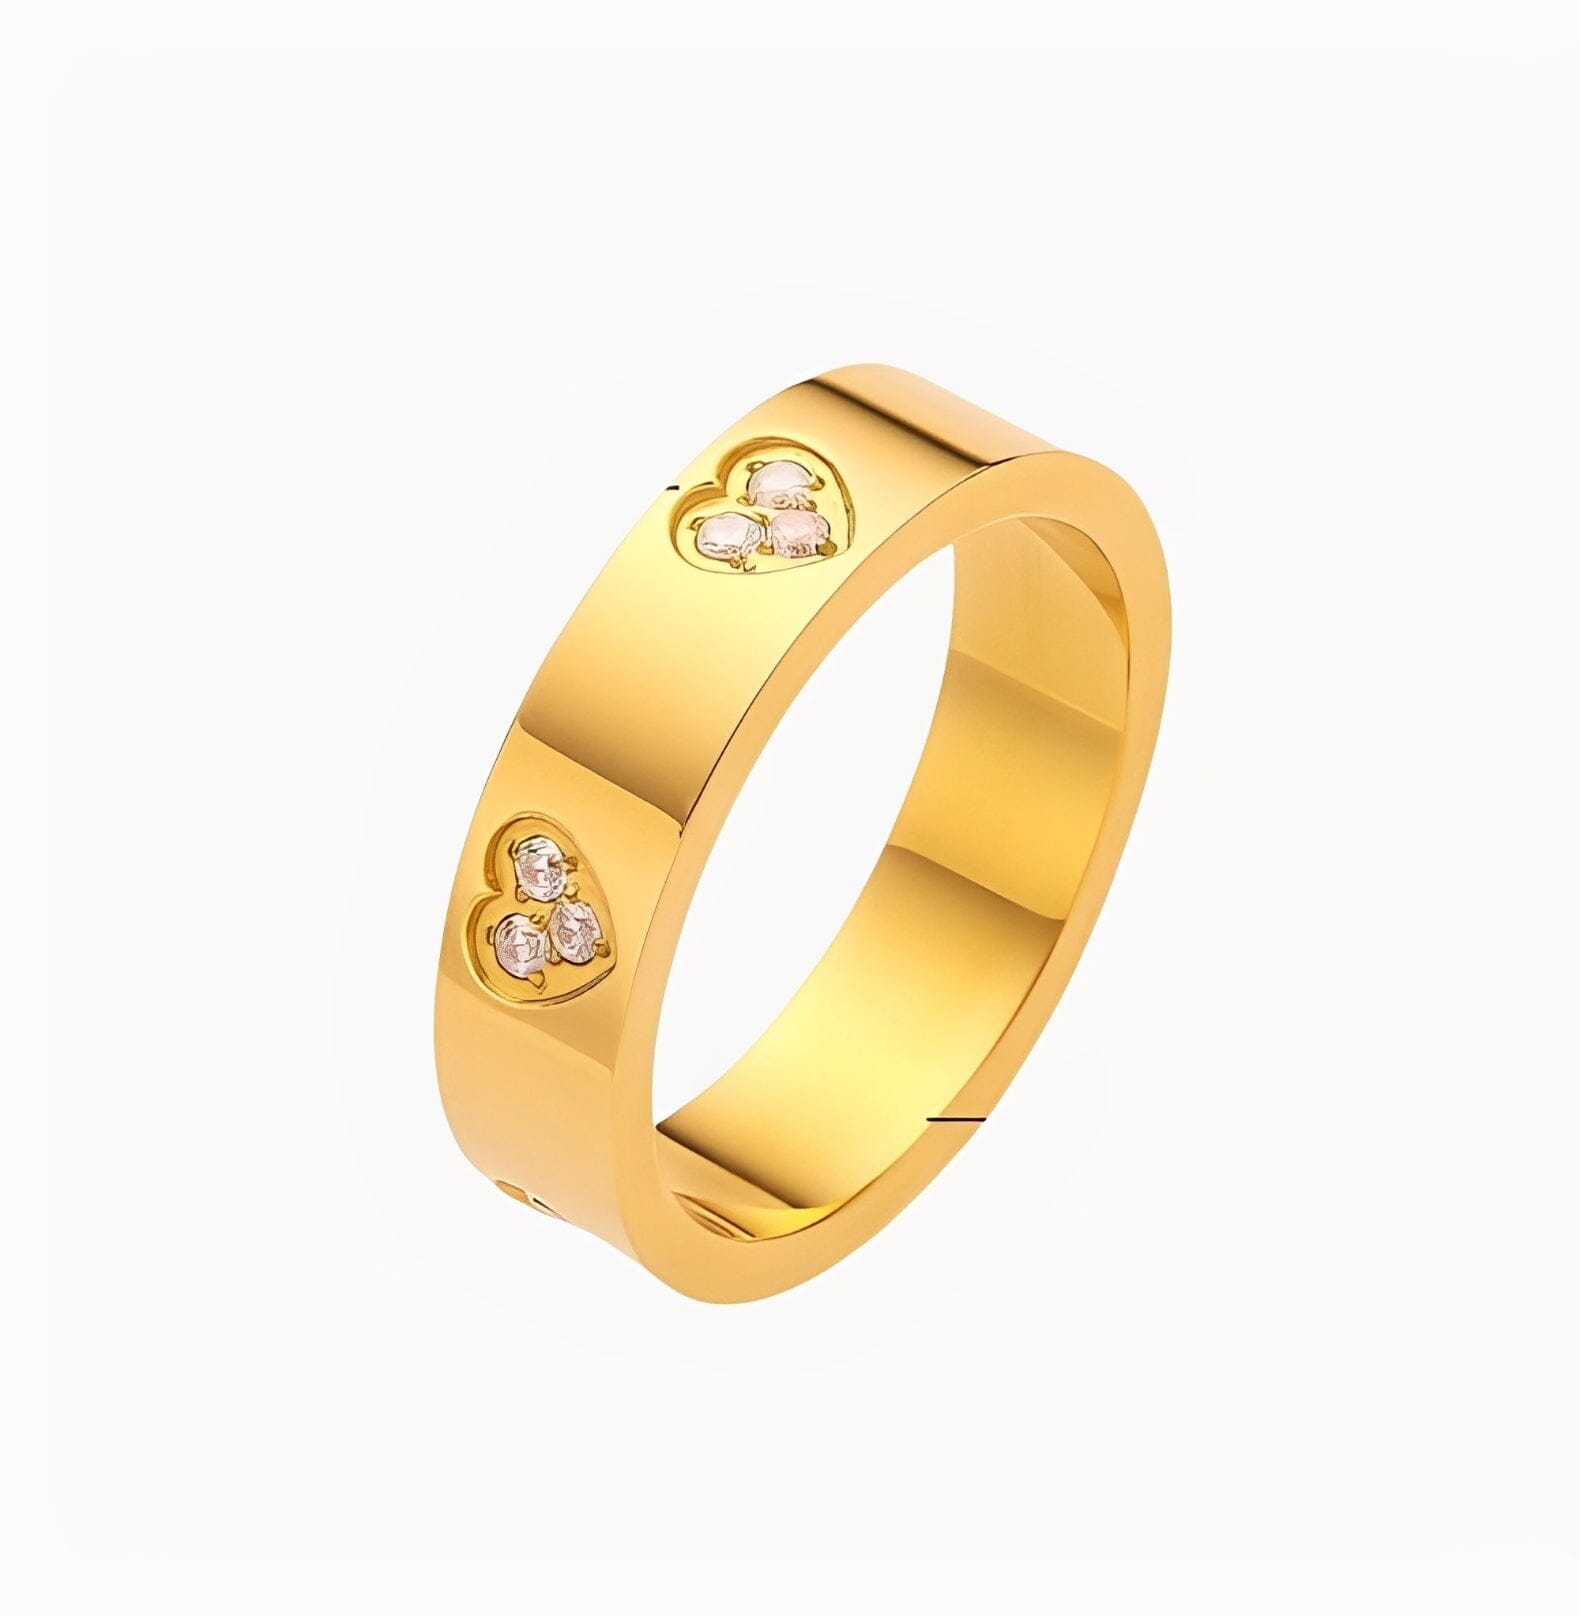 INTERSTELLAR STAR RING ring Yubama Jewelry Online Store - The Elegant Designs of Gold and Silver ! 